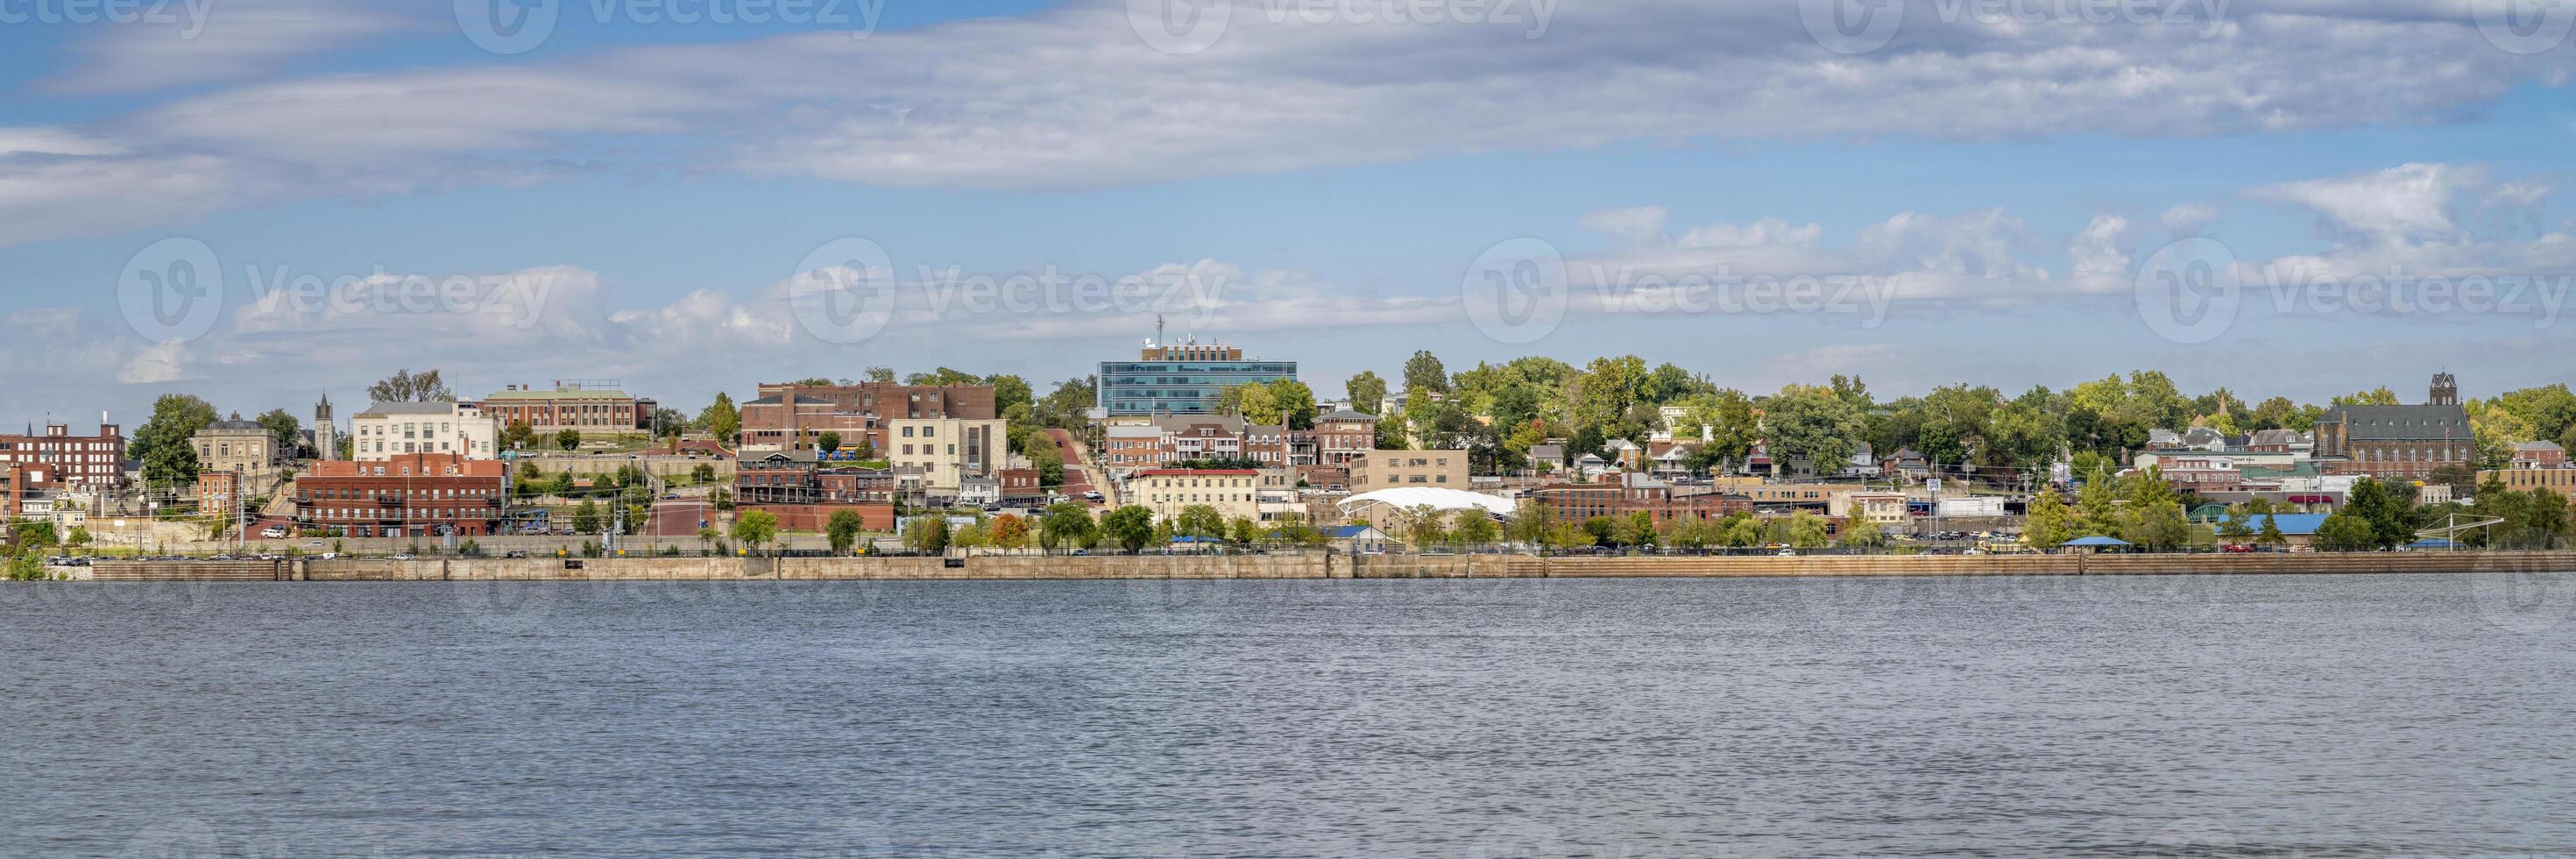 cityscape panorama of Alton in Illinois on a shore of the Mississippi River, a view from the Missouri shore photo